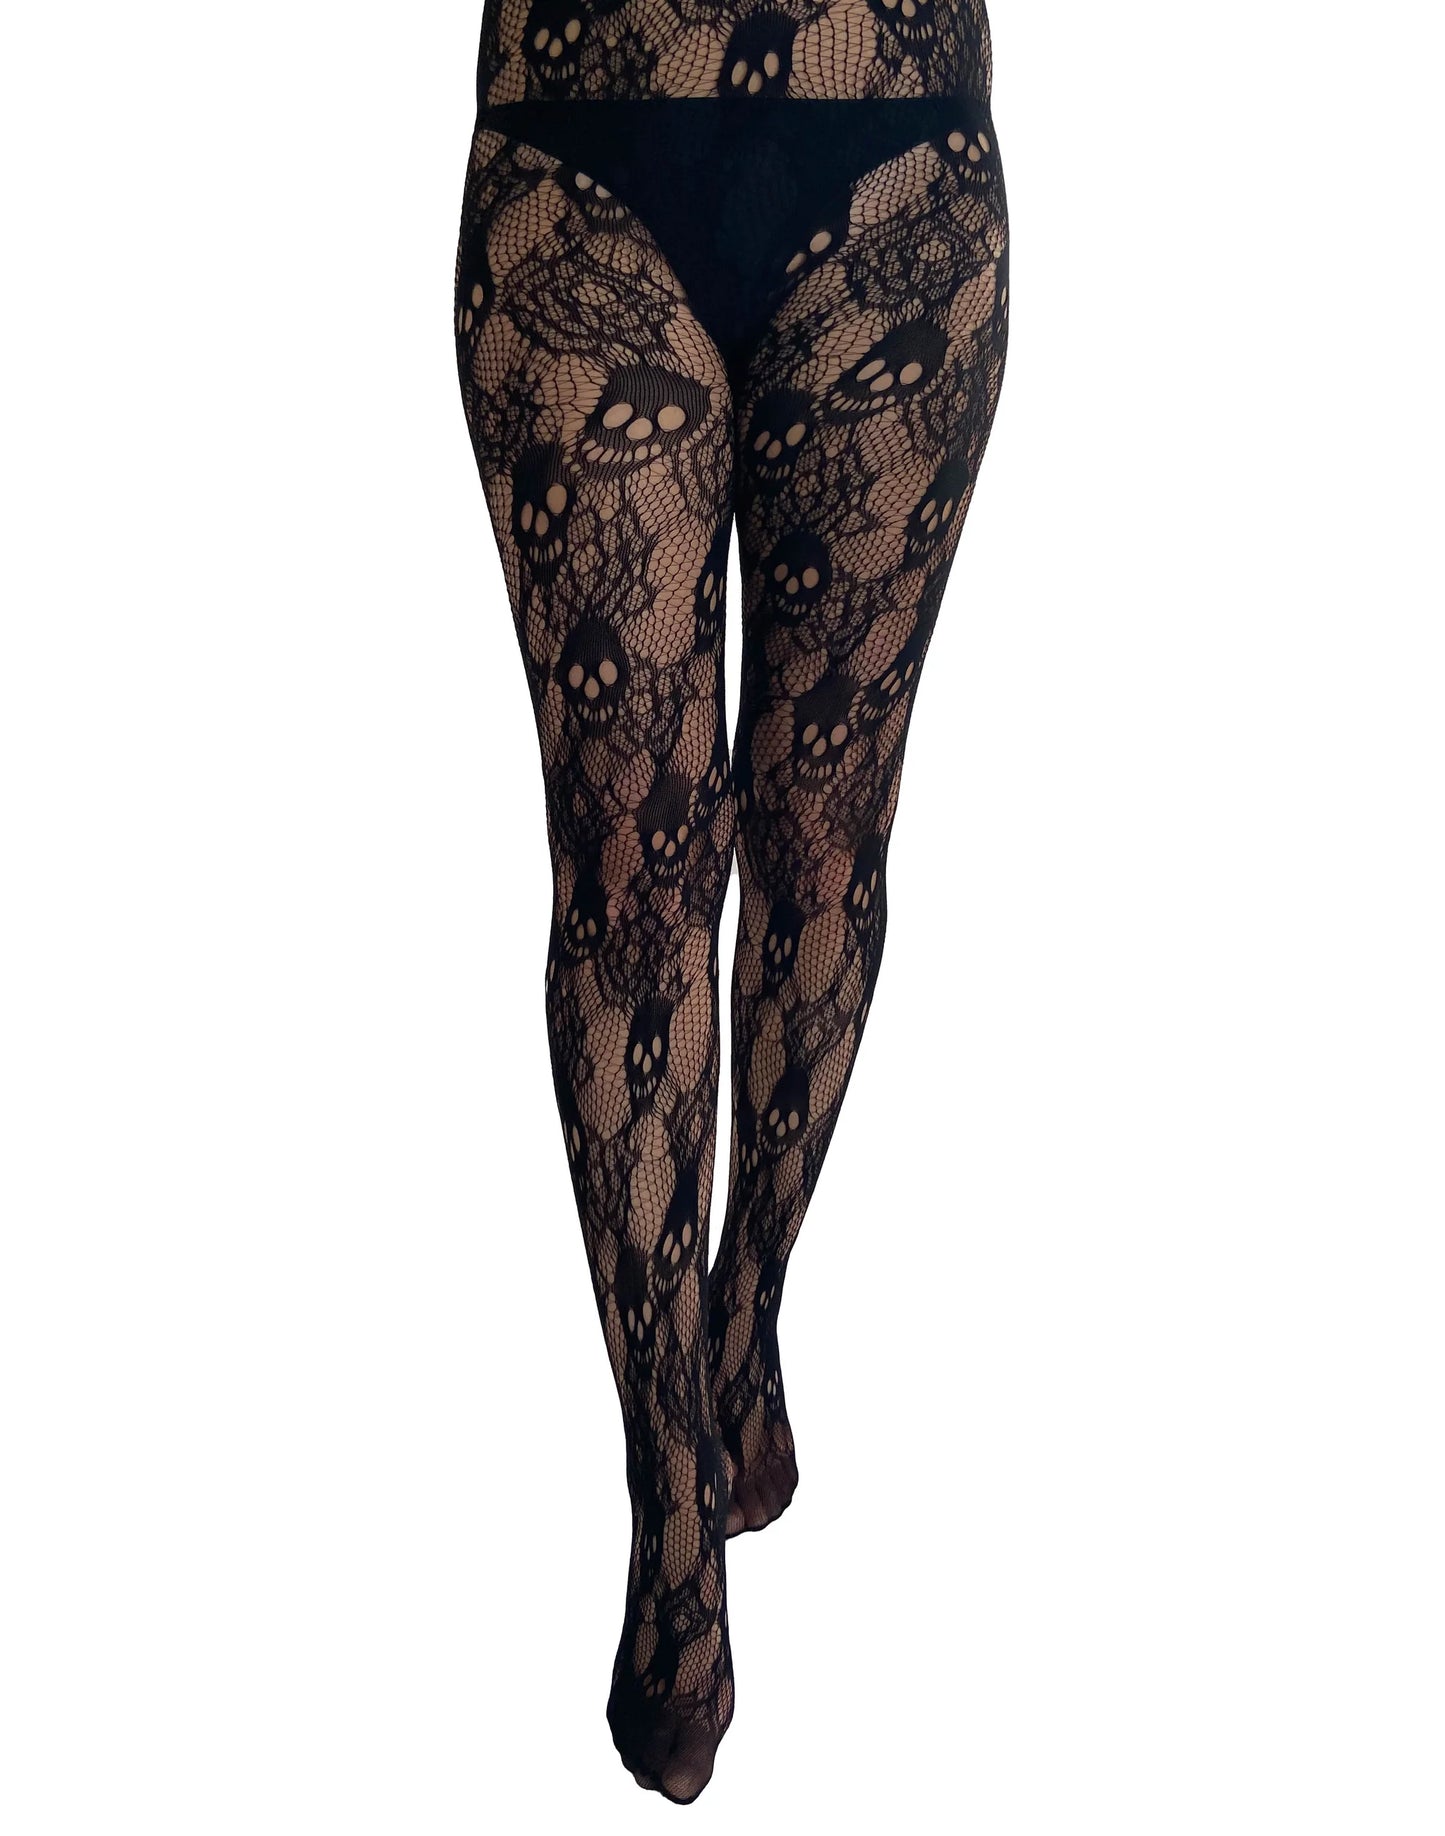 Pamela Mann Rose Skull Net Tights - Black openwork fishnet tights with a roses and skull lace style pattern.